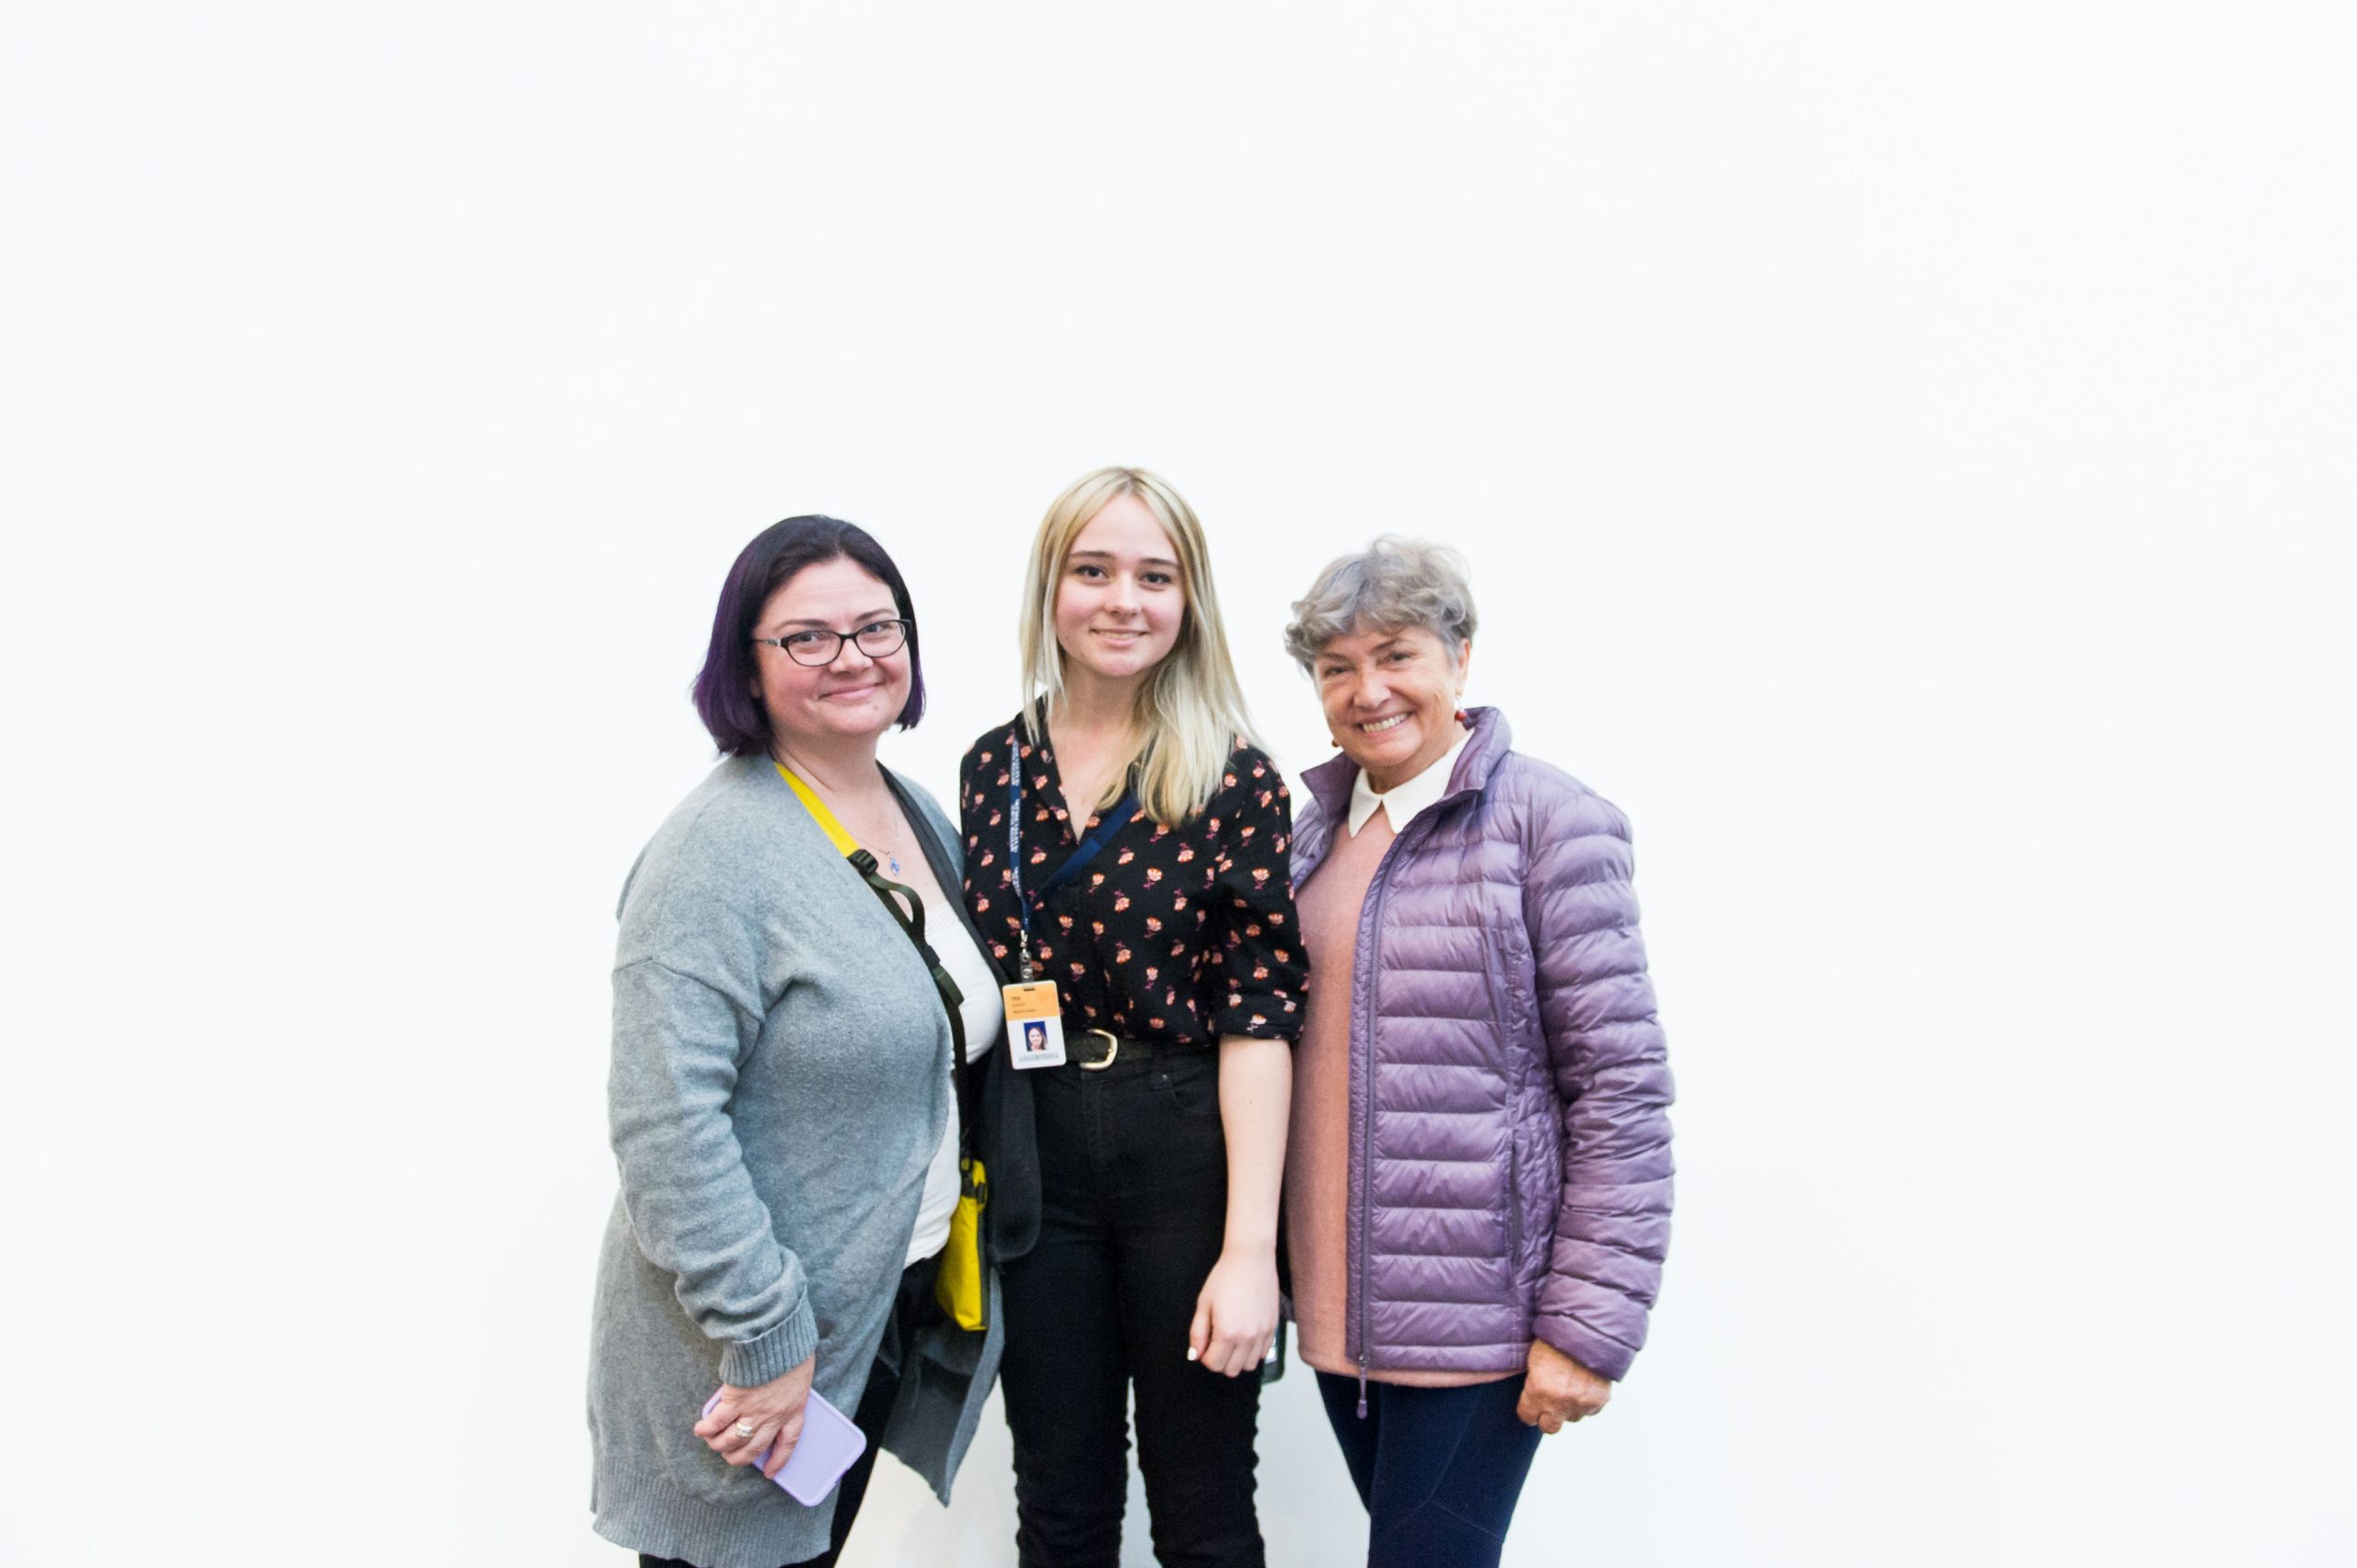 Teen Art Connect intern and <em>What We Hold</em> participant Téa Kaplan with her mother and grandmother at the opening reception.